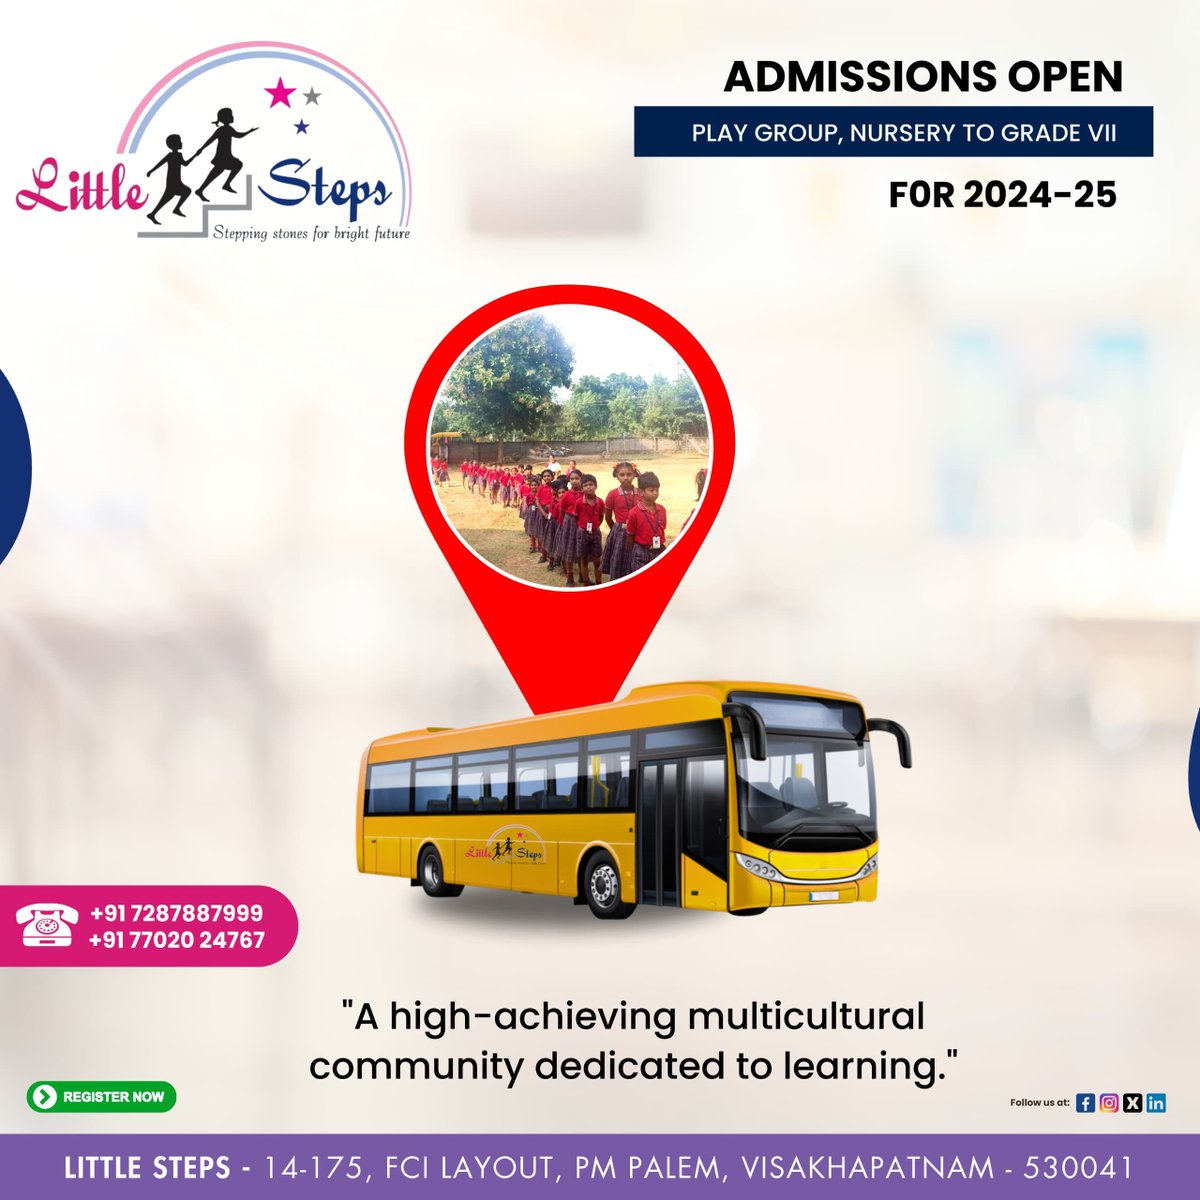 Little Steps: Where Community Unites for Lifelong Learning and Empowerment.🌟

Call us: +91 7287887999 | +91 77020 24767

#CommunityLearning #EducationForAll #LifelongLearning #LittleStepsCommunity #IgniteCuriosity #SocialImpactEducation #TogetherWeLearn #EducateAndEmpower